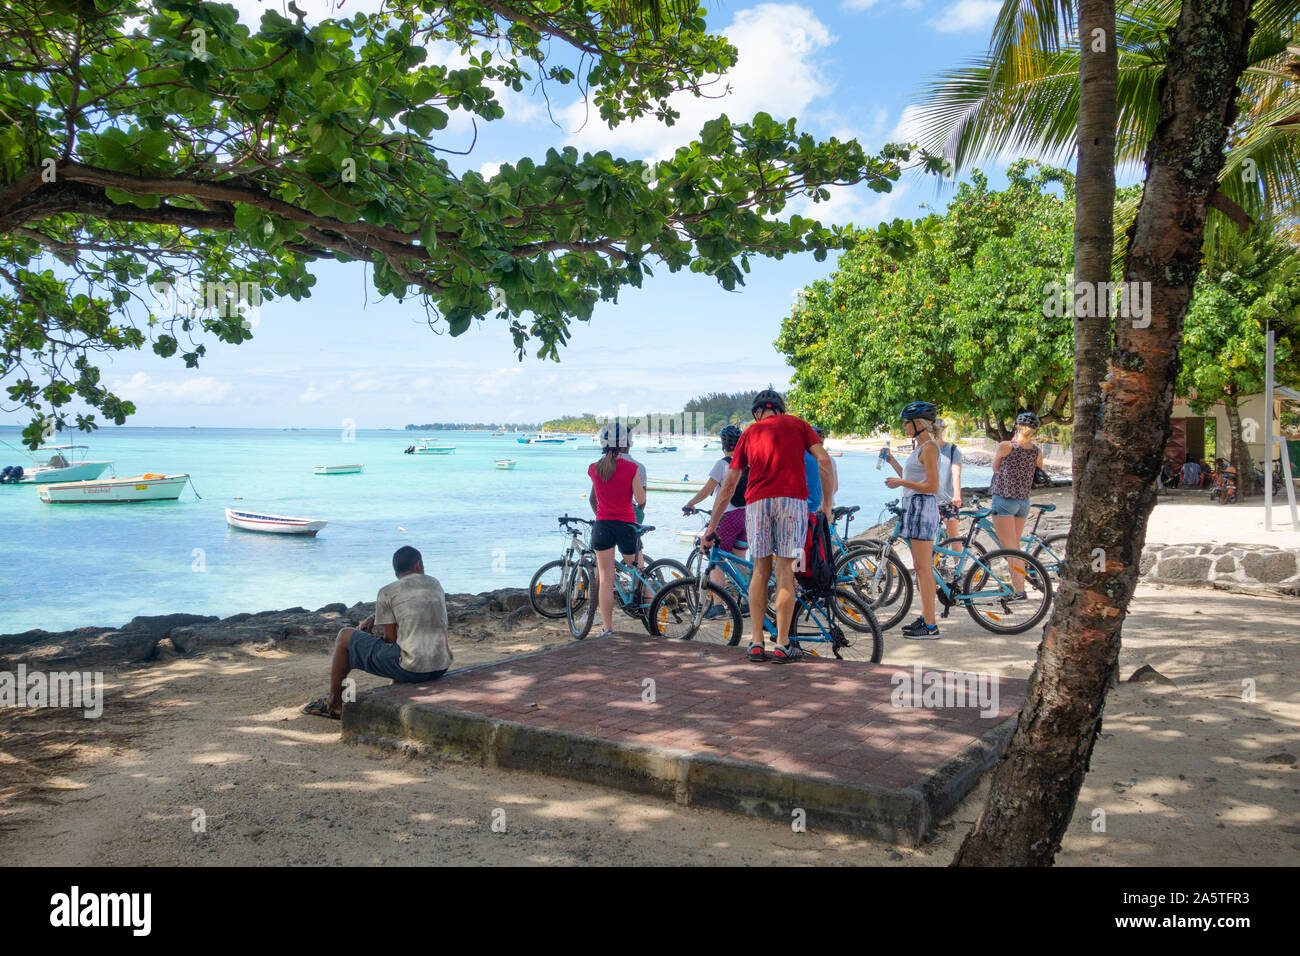 Mauritius cycling; a bicycle tour group of tourists by the beach, Trou aux Biches, Mauritius Stock Photo